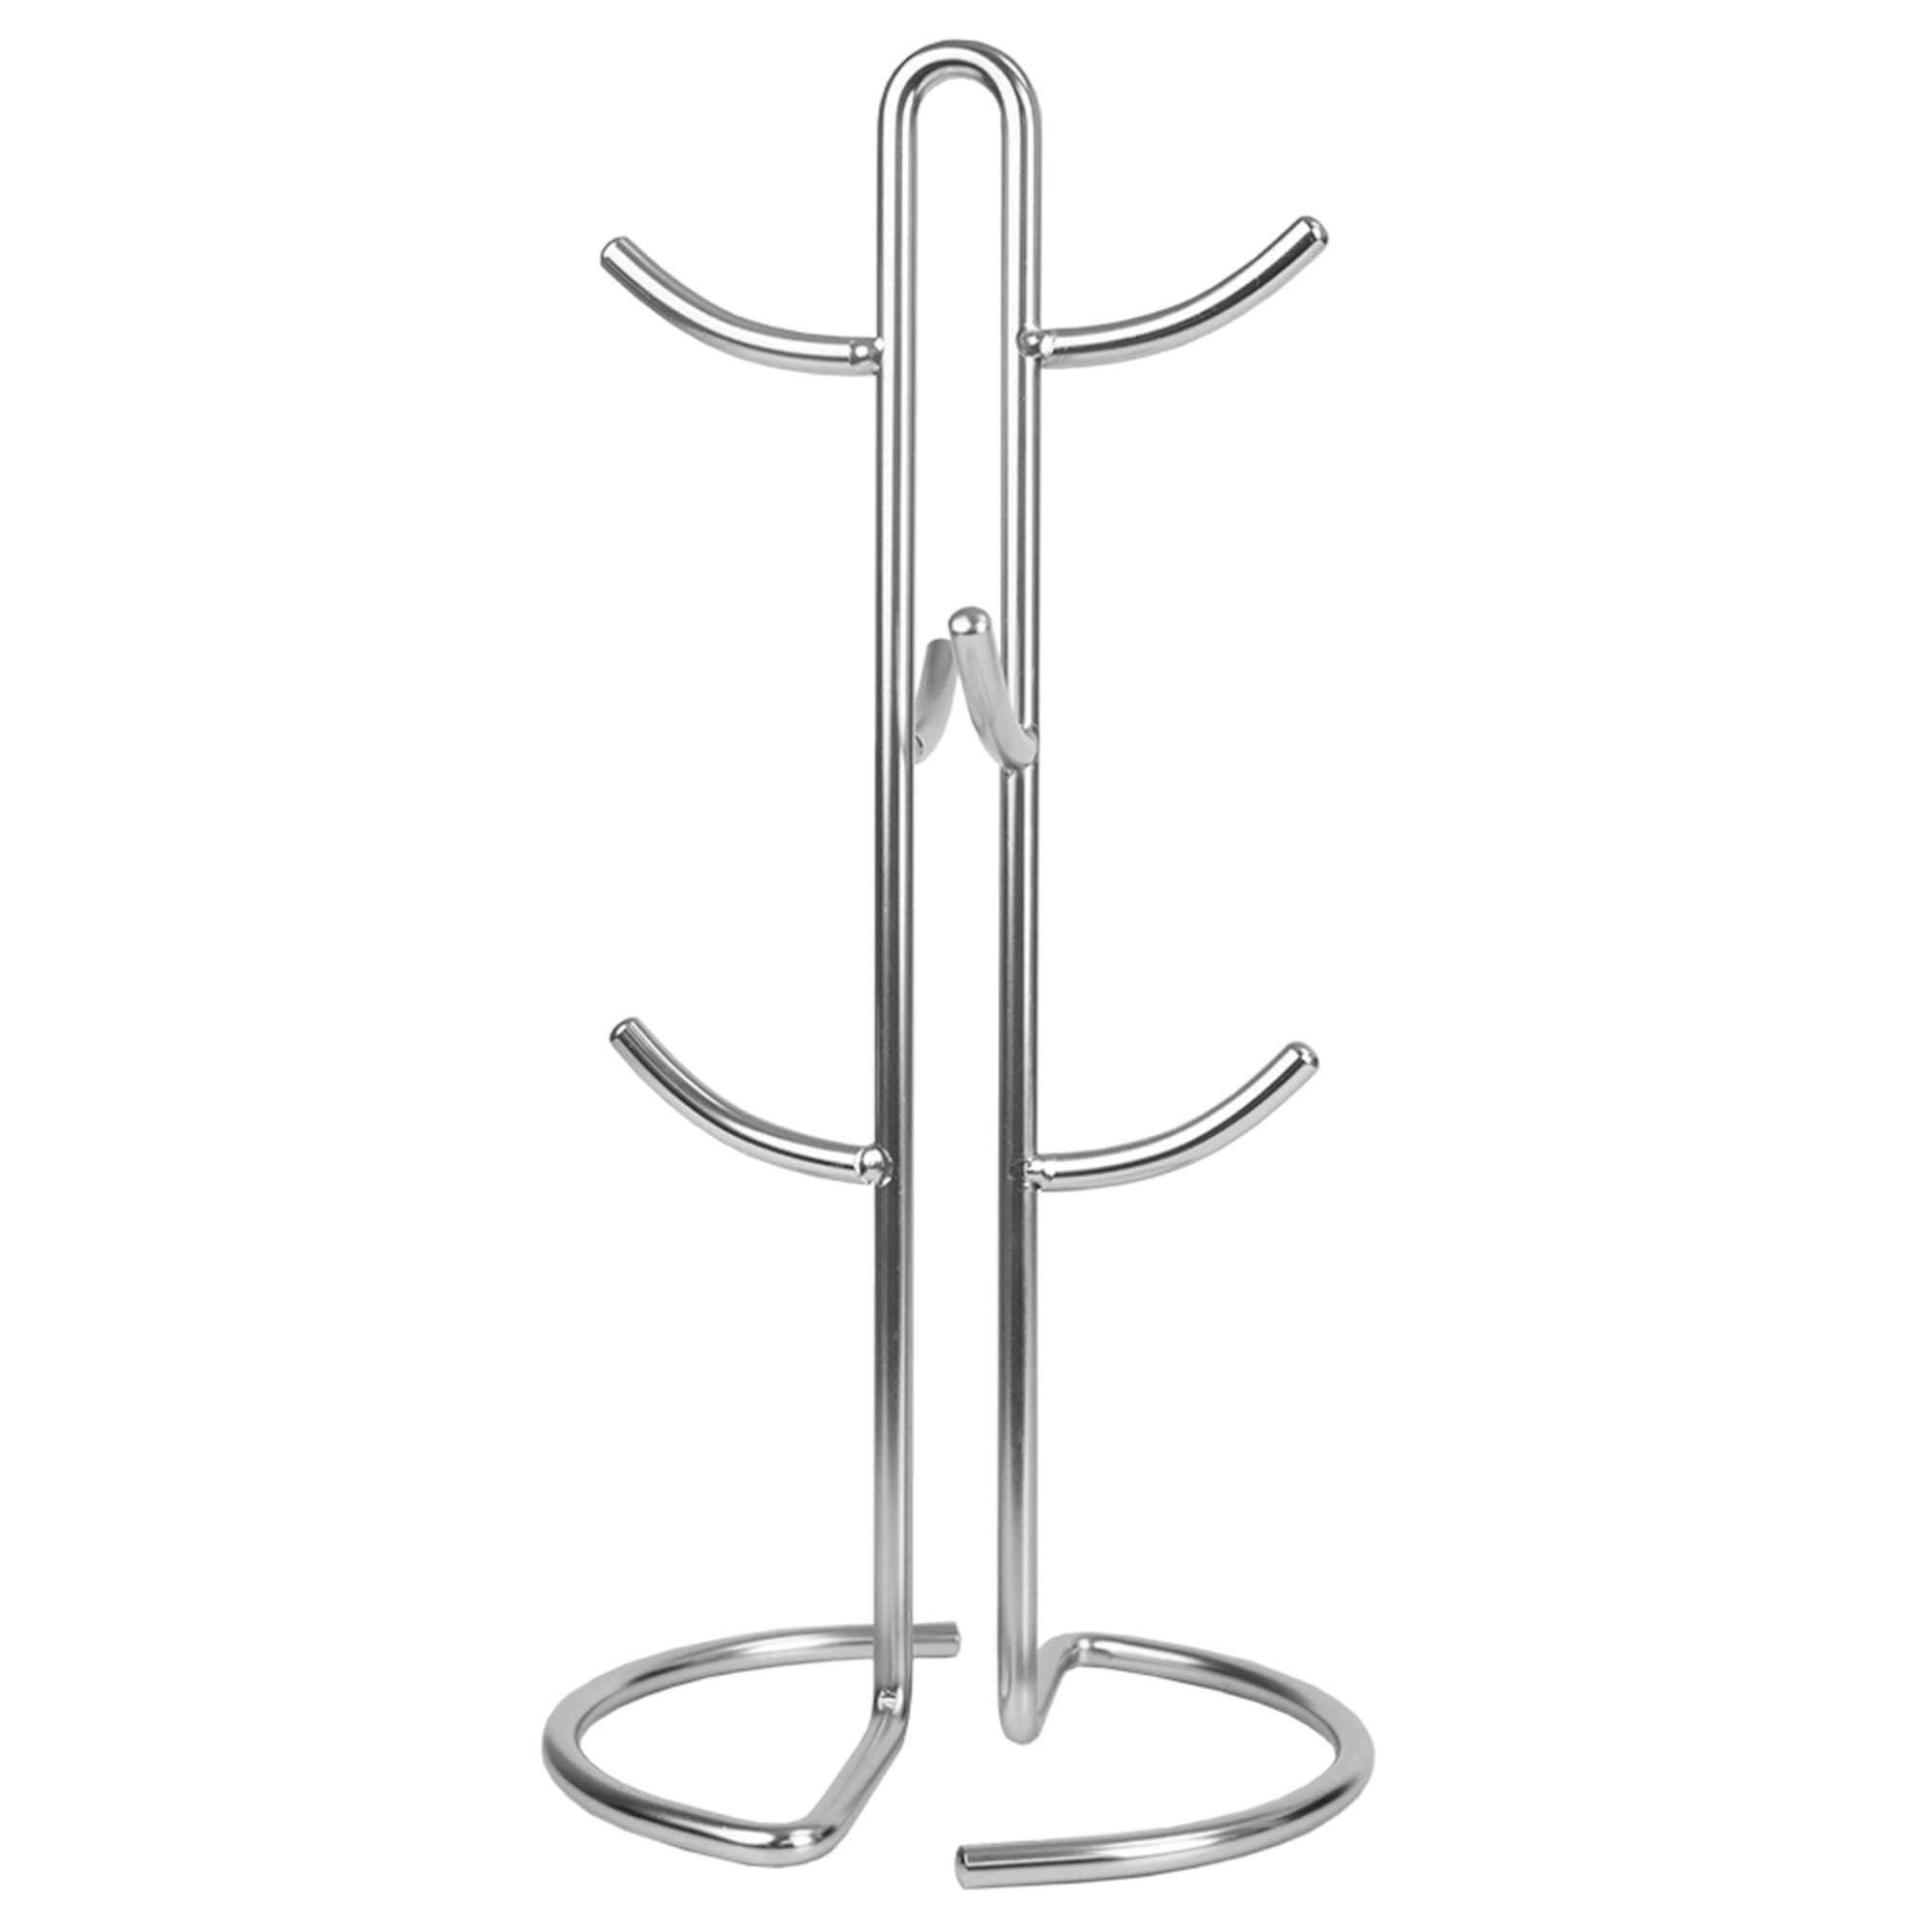 Home Basics Simplicity Collection 6 Hook Steel Mug Tree, Satin Chrome $15.00 EACH, CASE PACK OF 12